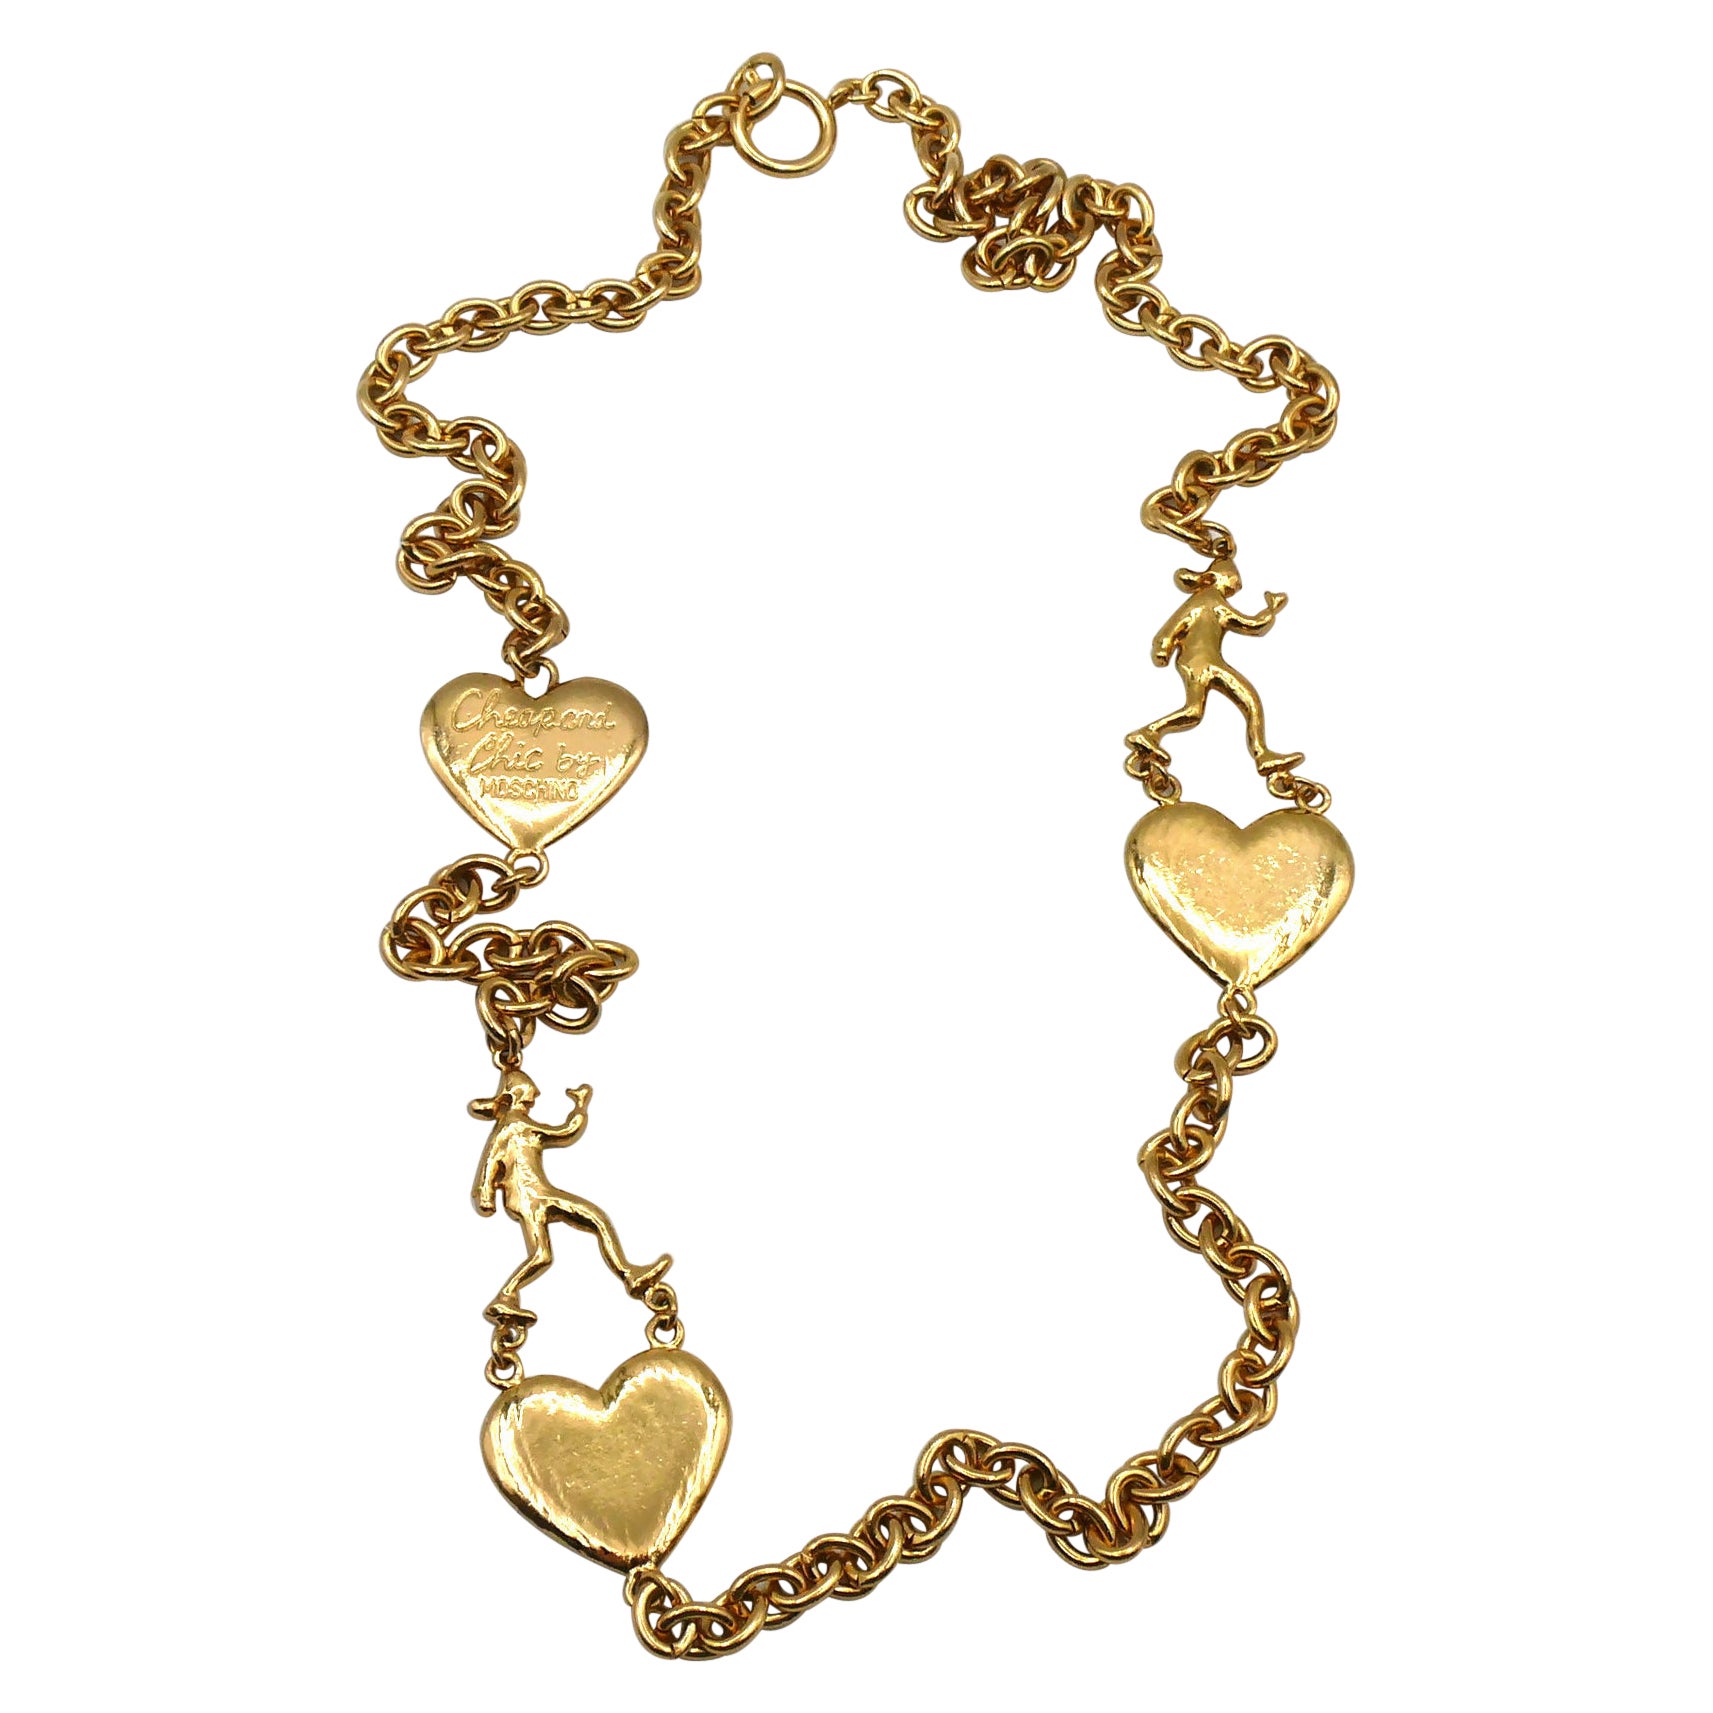 Gold Tone Chain Necklace - 1,150 For Sale on 1stDibs